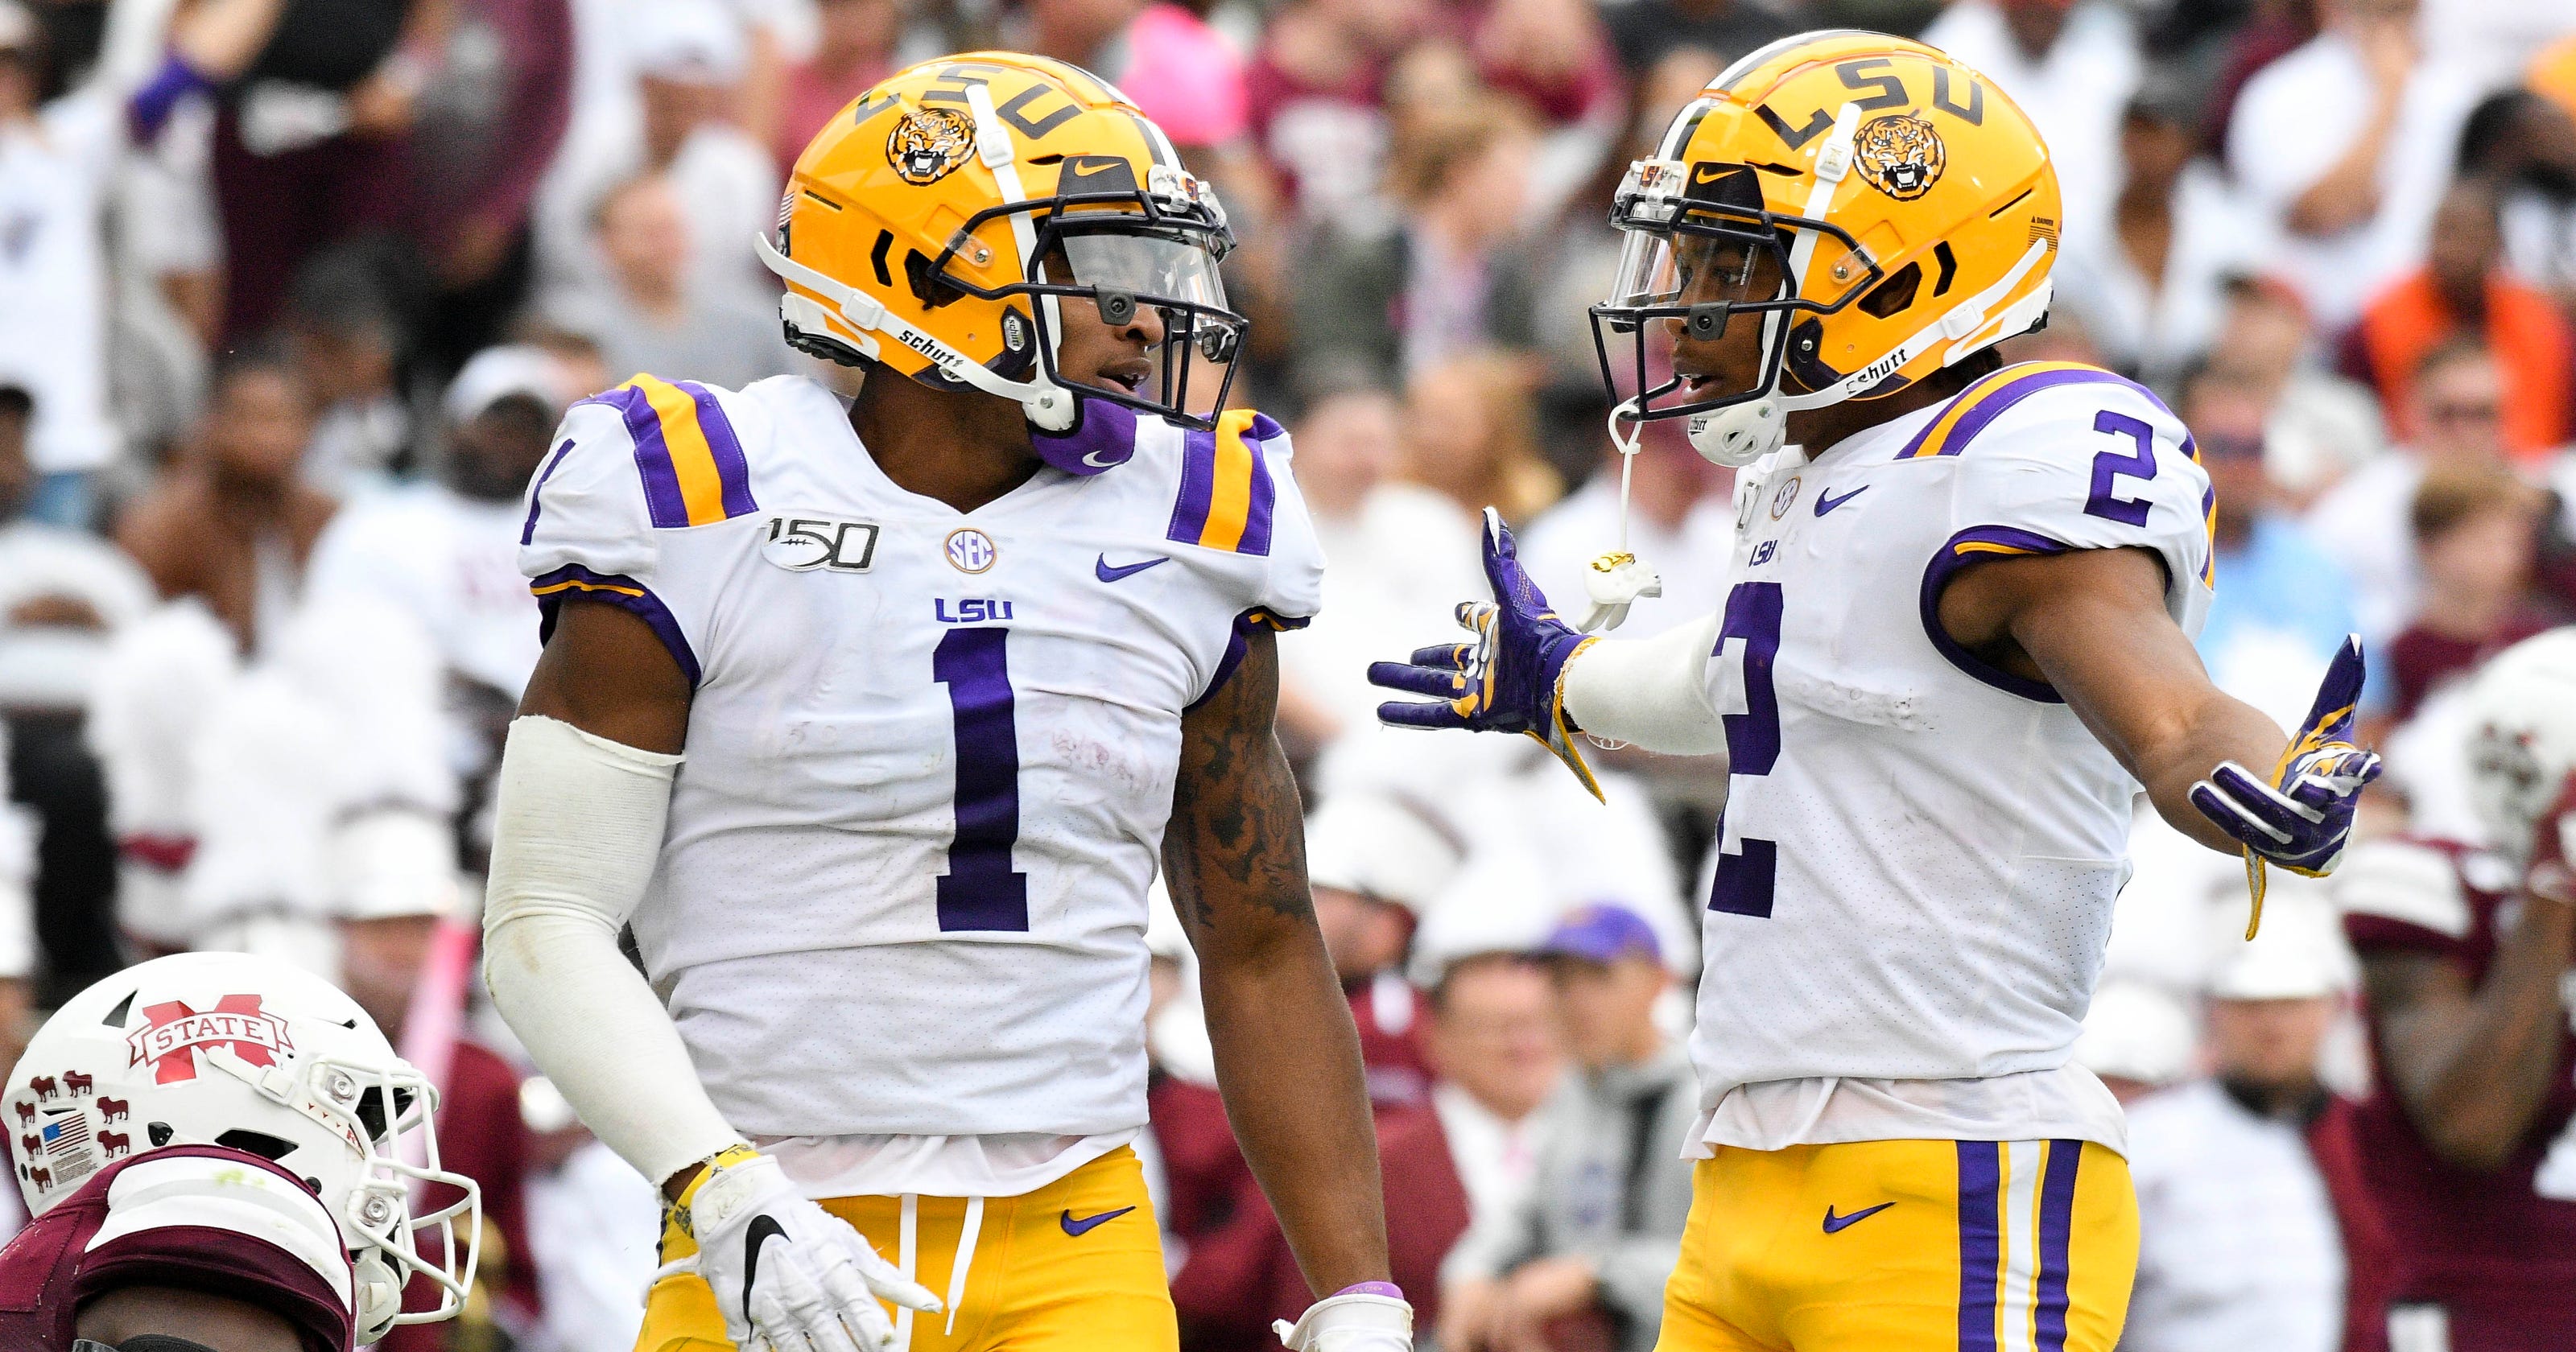 LSU football ranked No. 1 in Associated Press poll